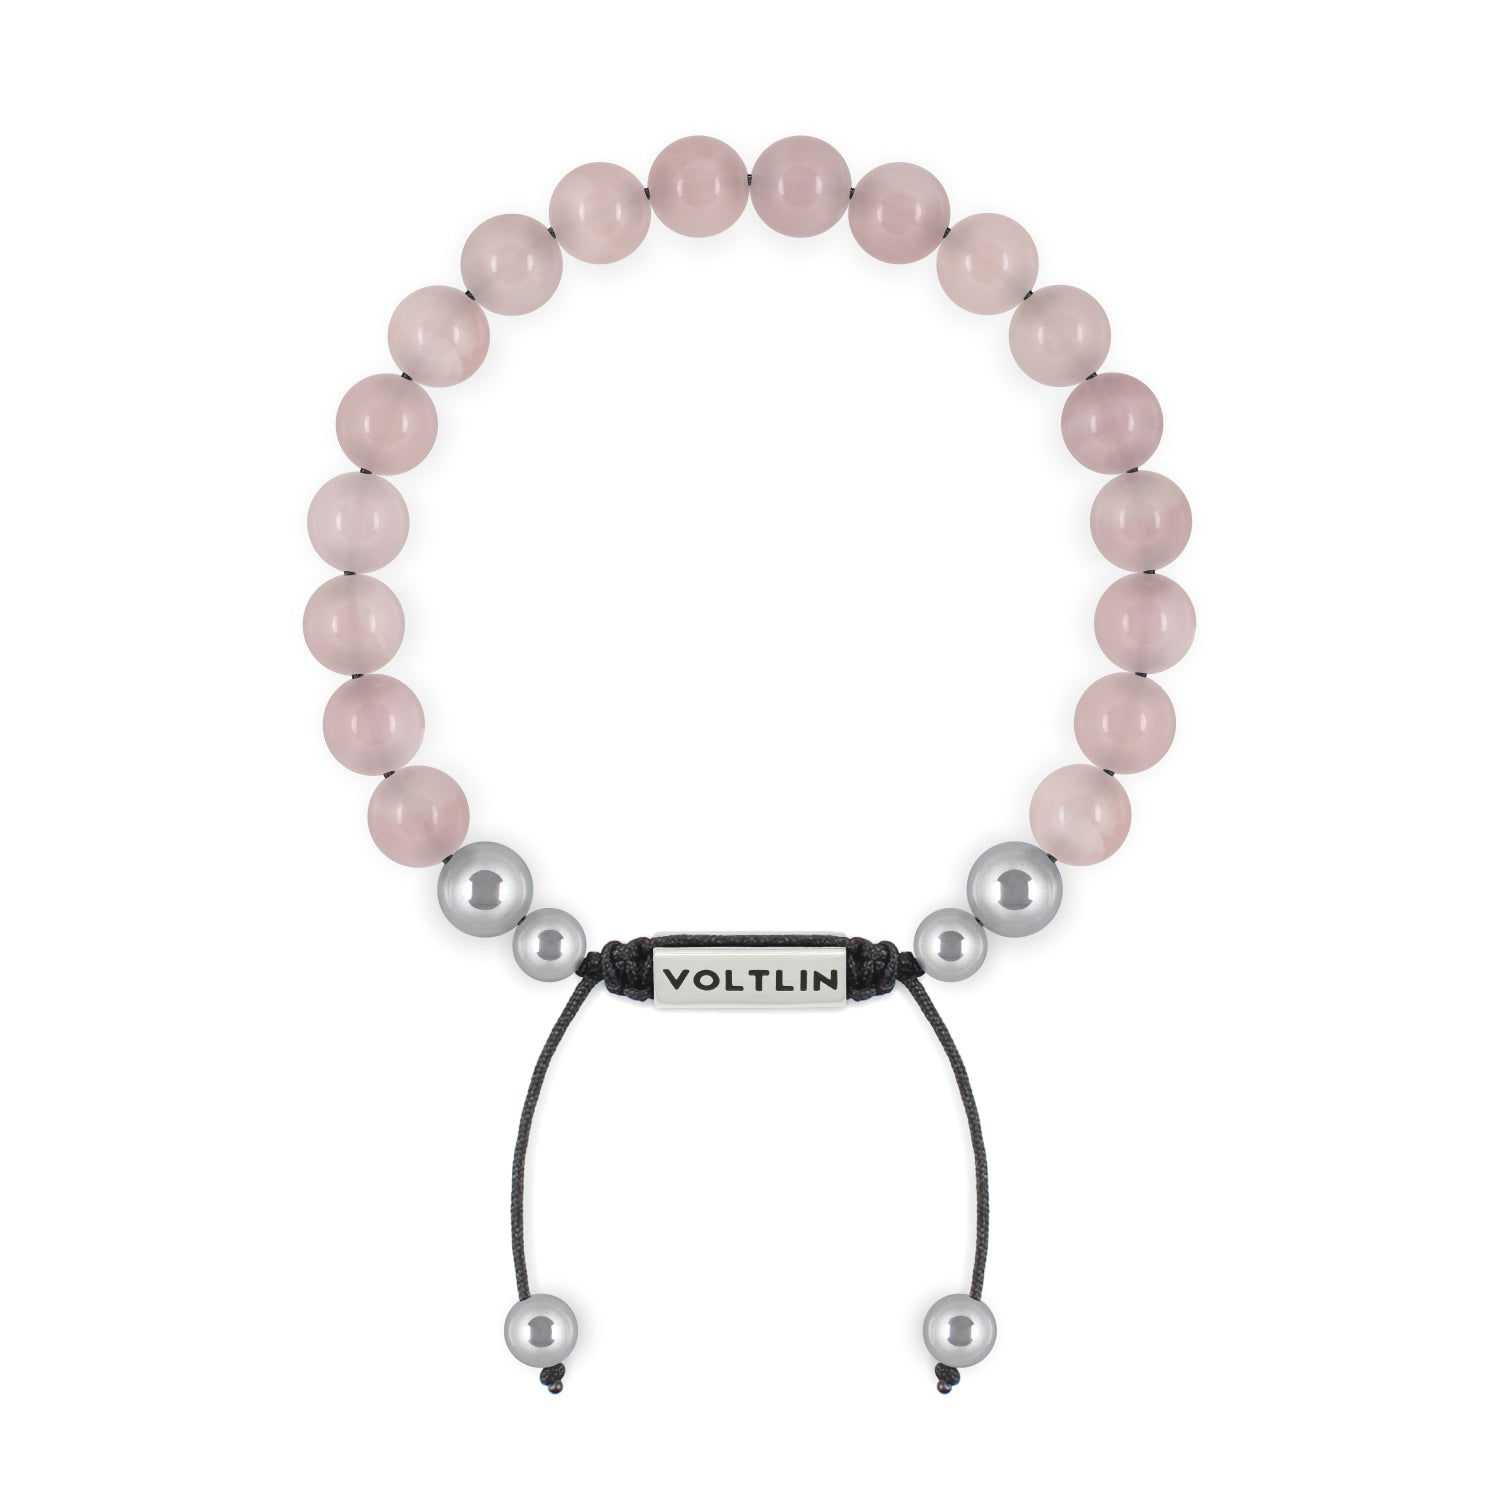 Front view of an 8mm Rose Quartz beaded shamballa bracelet with silver stainless steel logo bead made by Voltlin